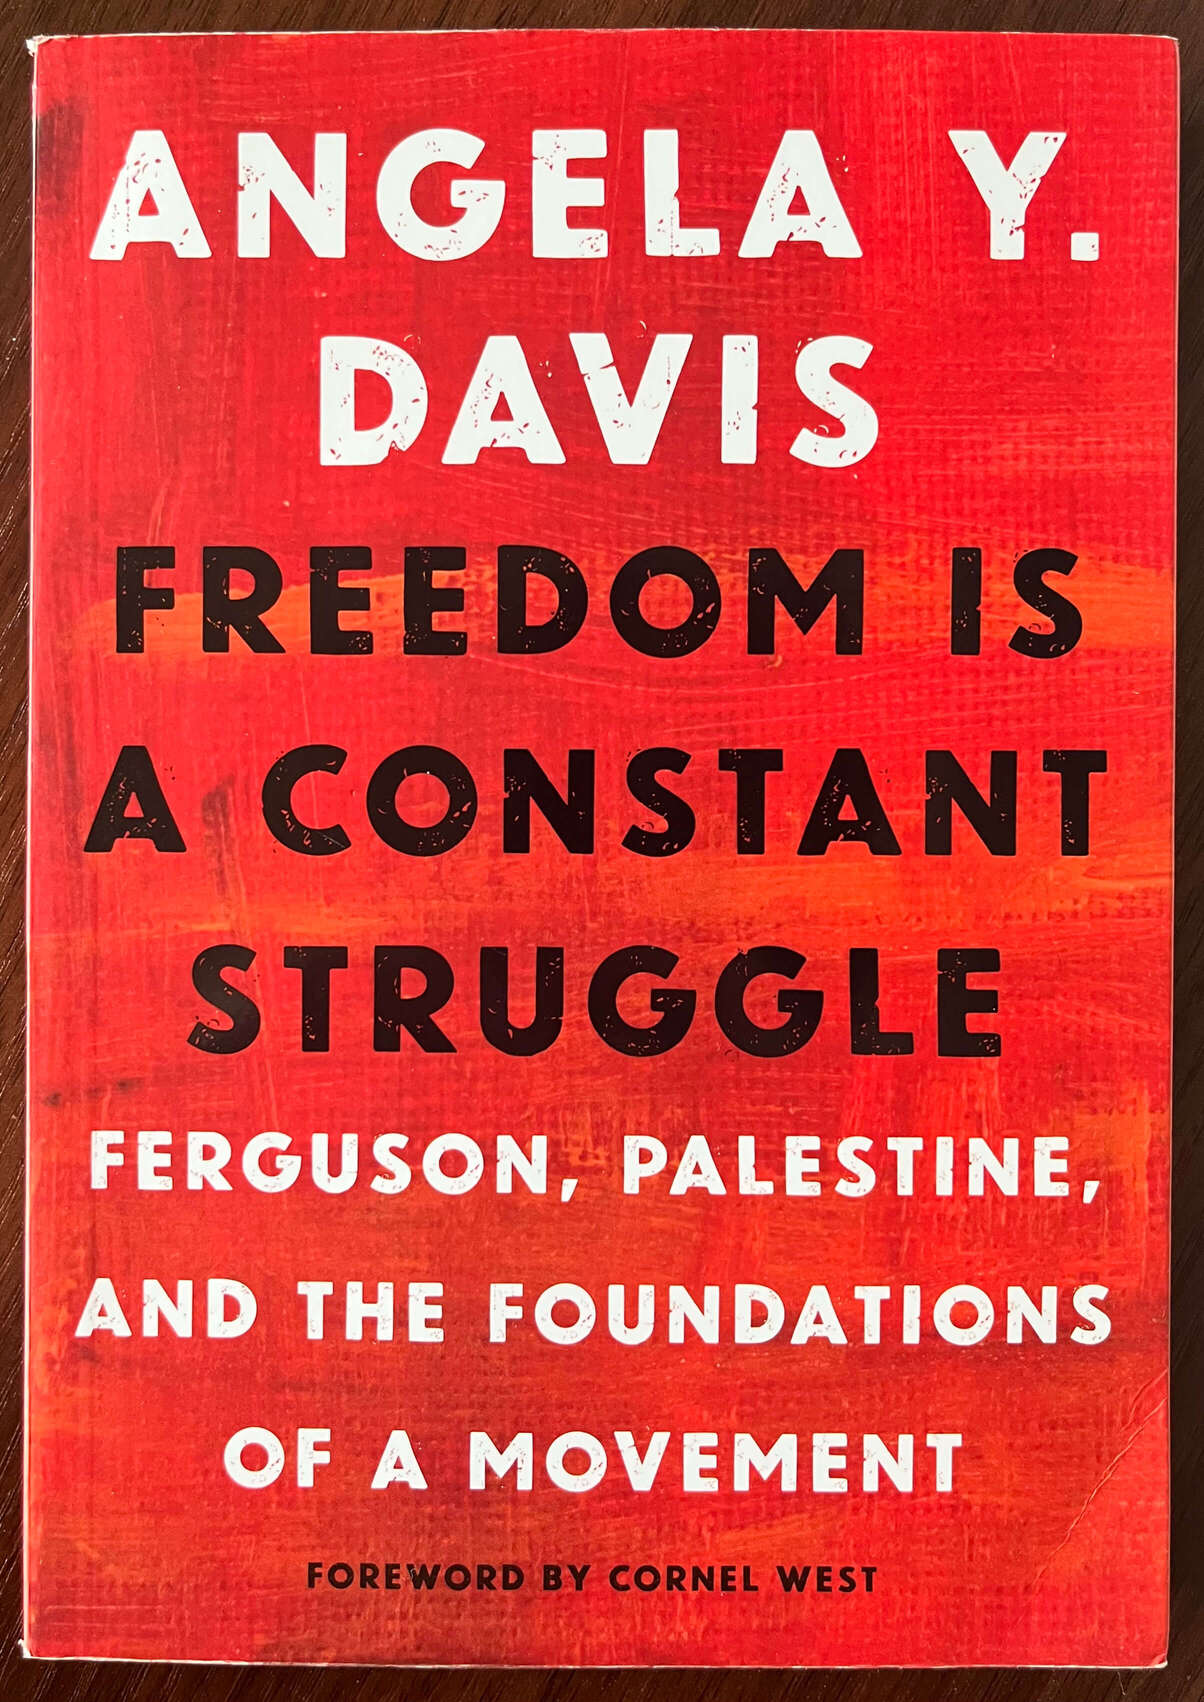 “Freedom is a Constant Struggle: Ferguson, Palestine, and the Foundations of a Movement” by Angela Y Davis. Foreword by Cornel West